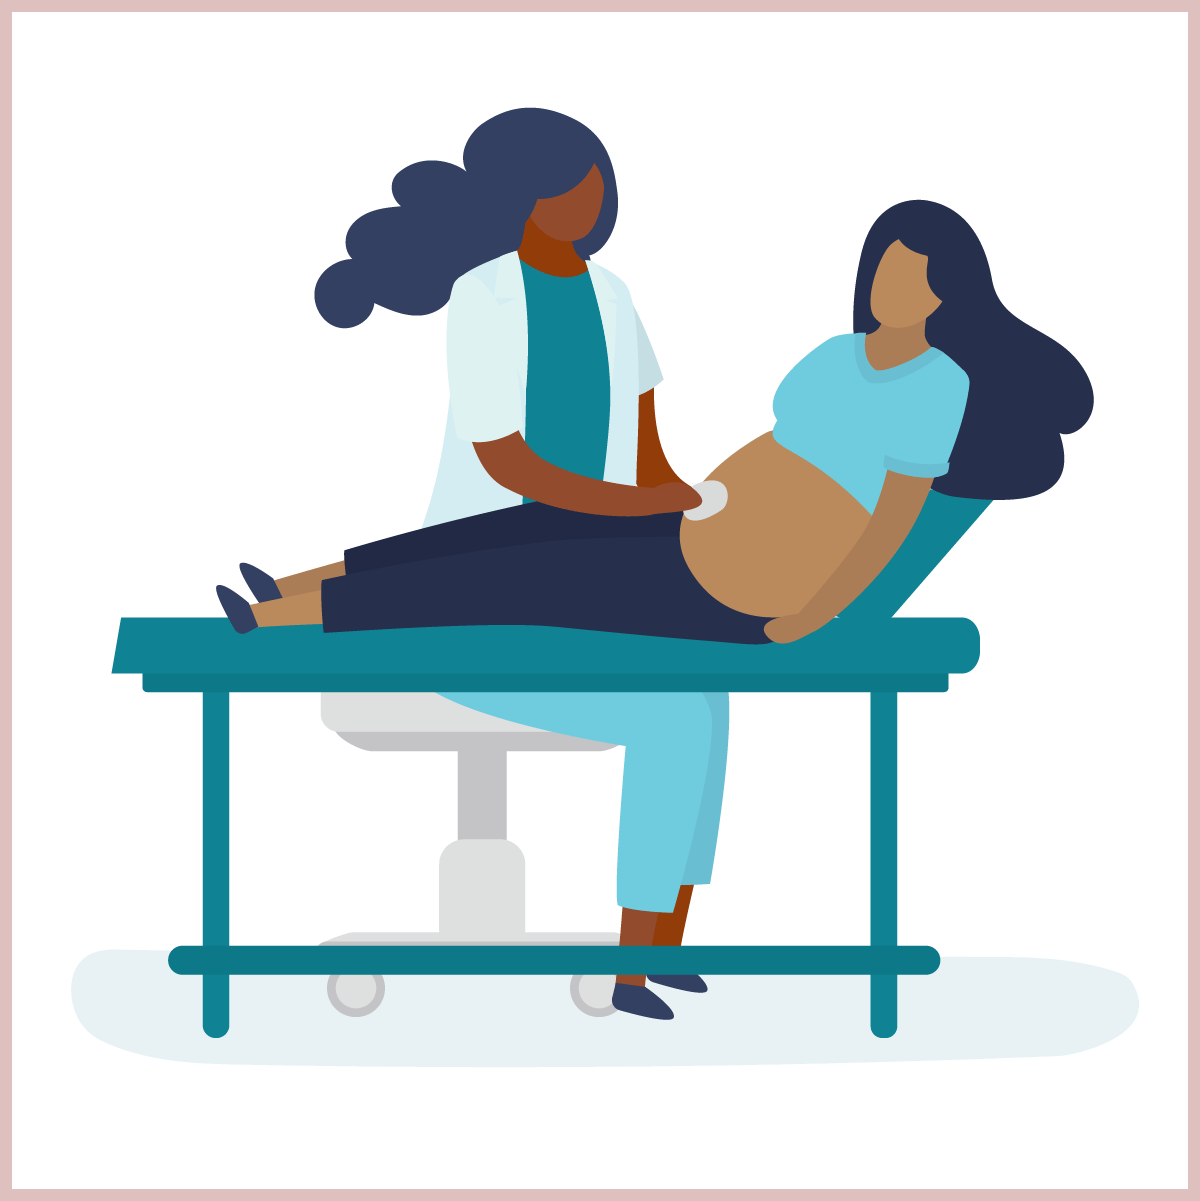 Illustration of a pregnant woman reclining on exam table with a midwife standing, examining the pregnant woman's abdomen